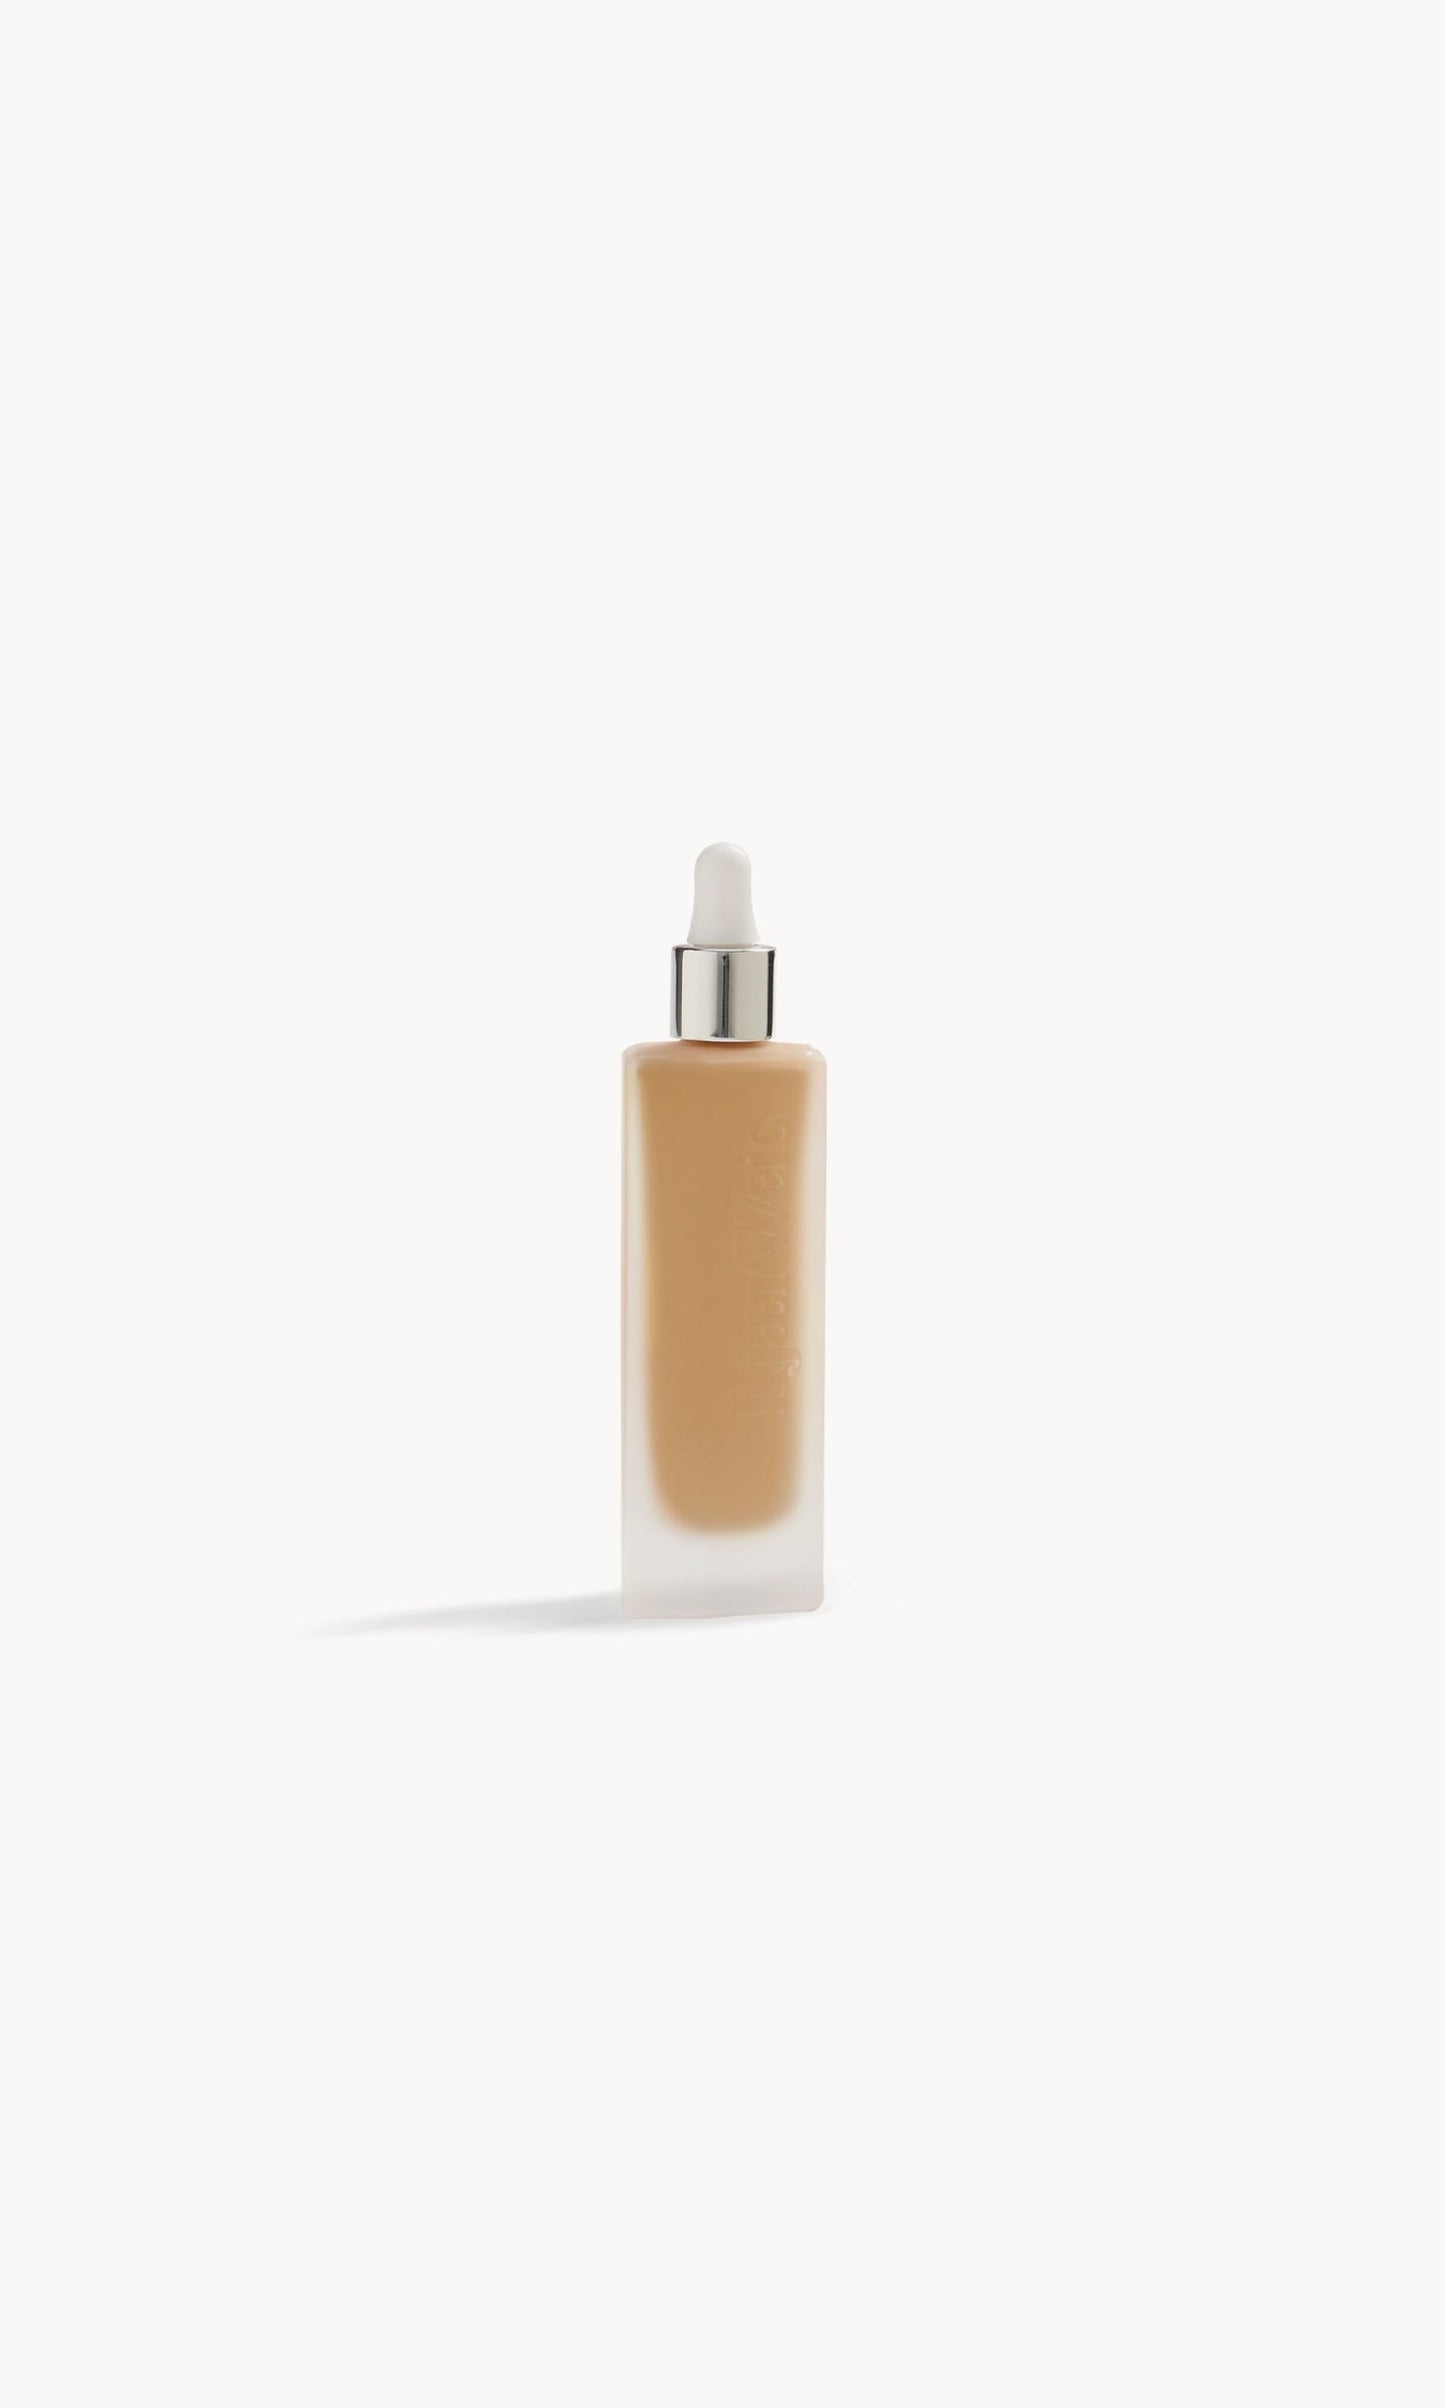 Invisible Touch Liquid Foundation--M235/Finesse